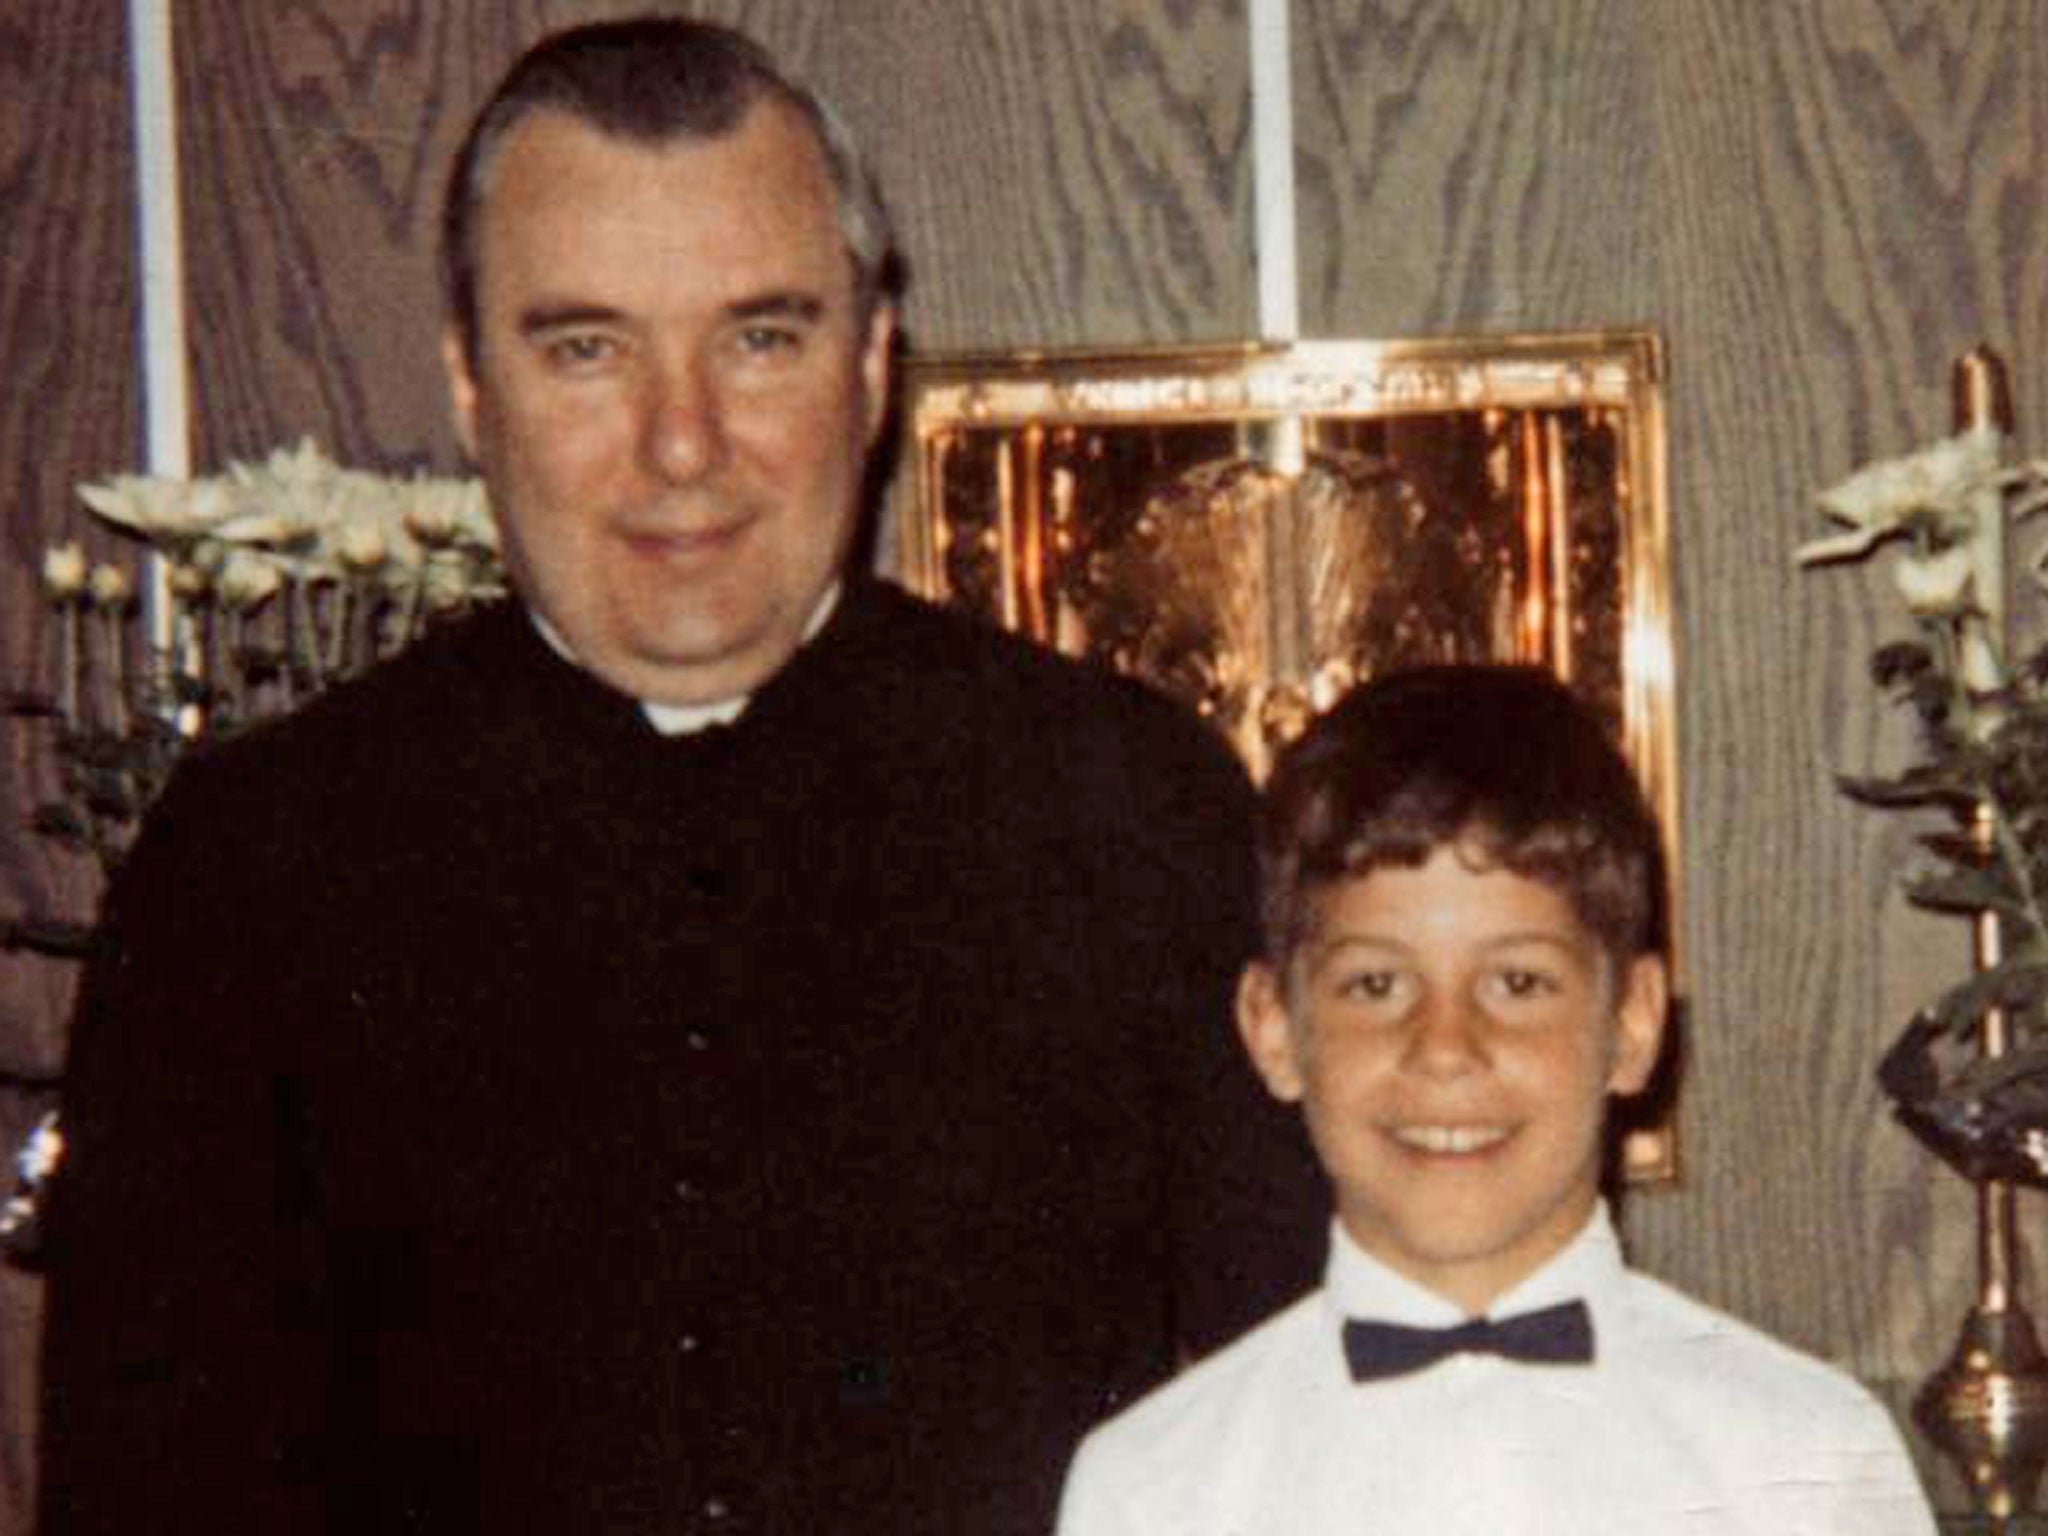 For over a quarter of a century, Catholic priest Lawrence C Murphy preyed on and sexually abused pupils at St John's School for the Deaf in St Francis, Wisconsin